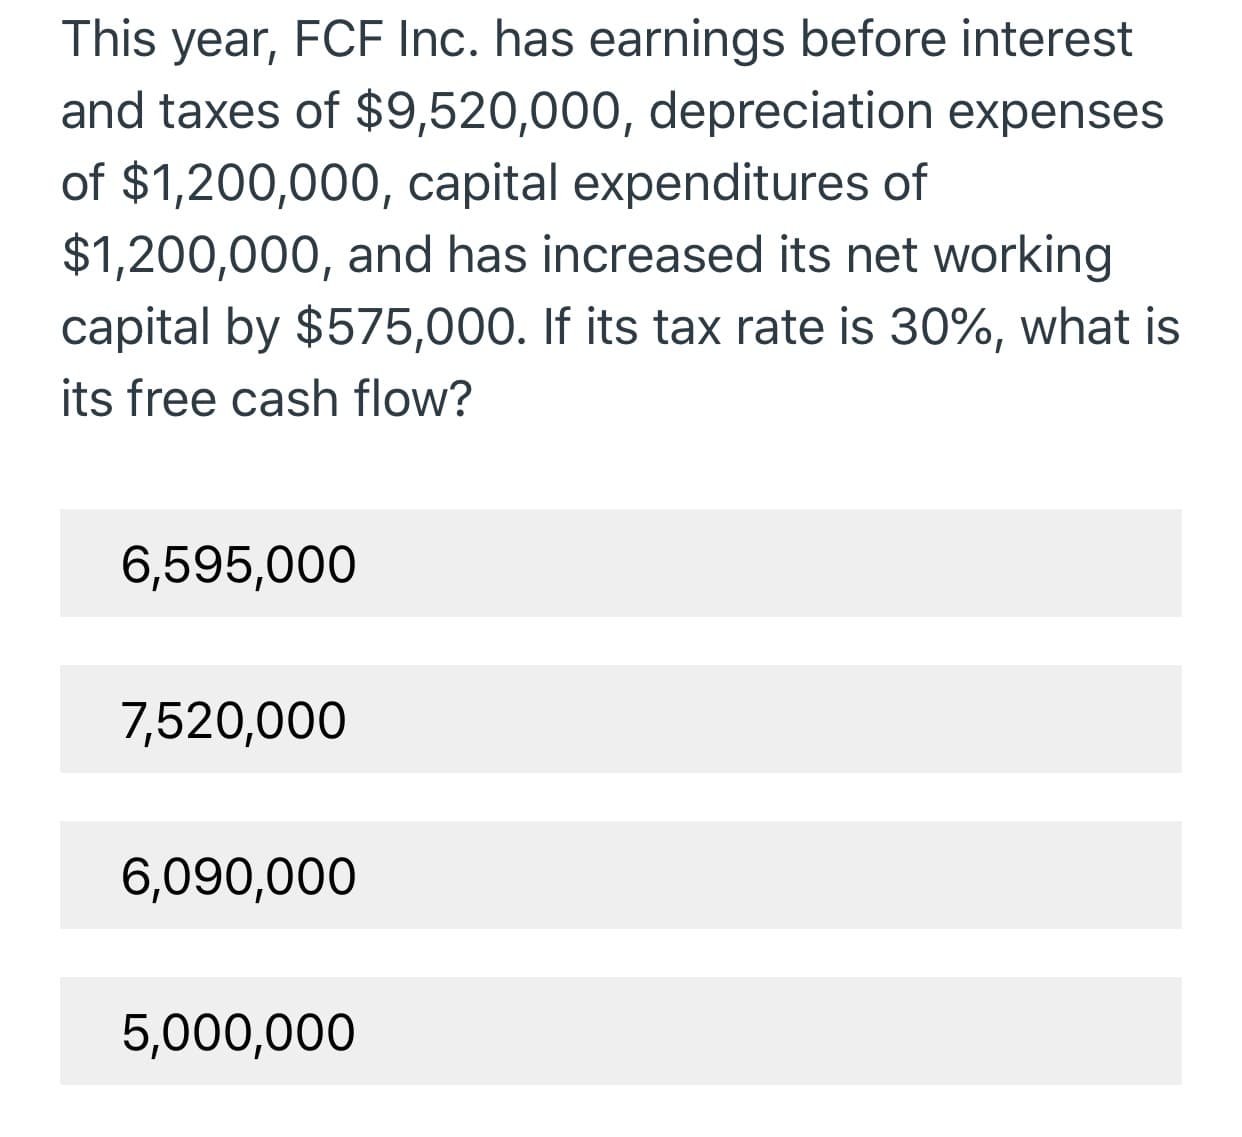 This year, FCF Inc. has earnings before interest
and taxes of $9,520,000, depreciation expenses
of $1,200,000, capital expenditures of
$1,200,000, and has increased its net working
capital by $575,000. If its tax rate is 30%, what is
its free cash flow?
6,595,000
7,520,000
6,090,000
5,000,000
